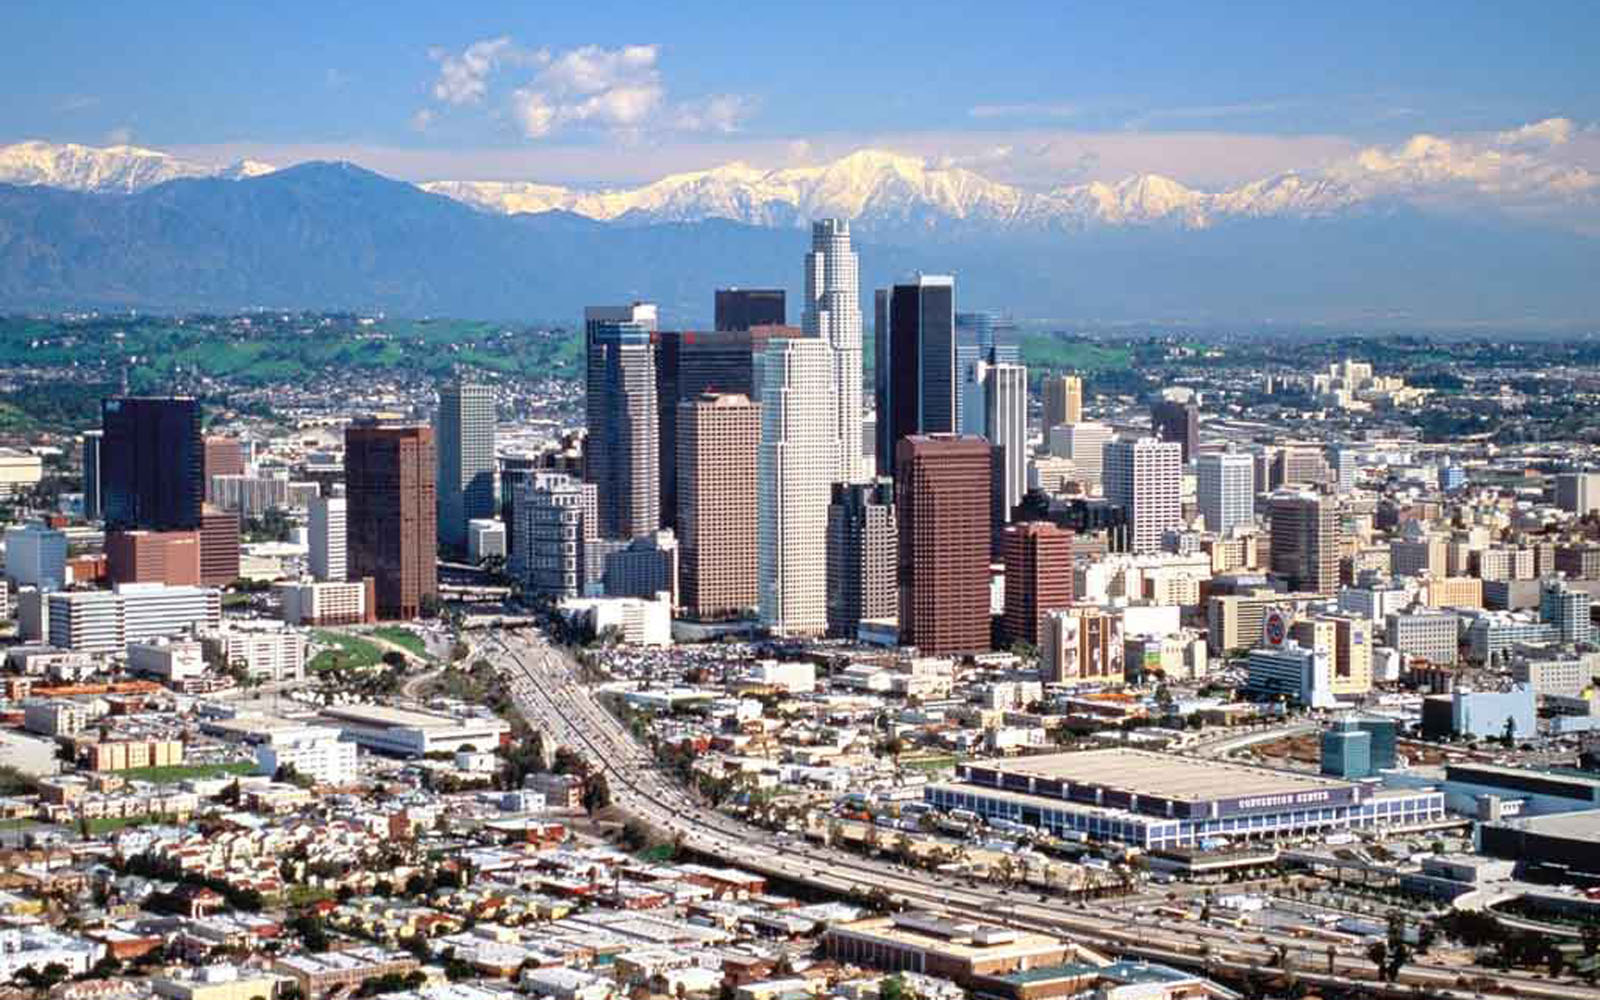 Tag: Los Angeles Wallpapers, Images, Photos and Pictures for free